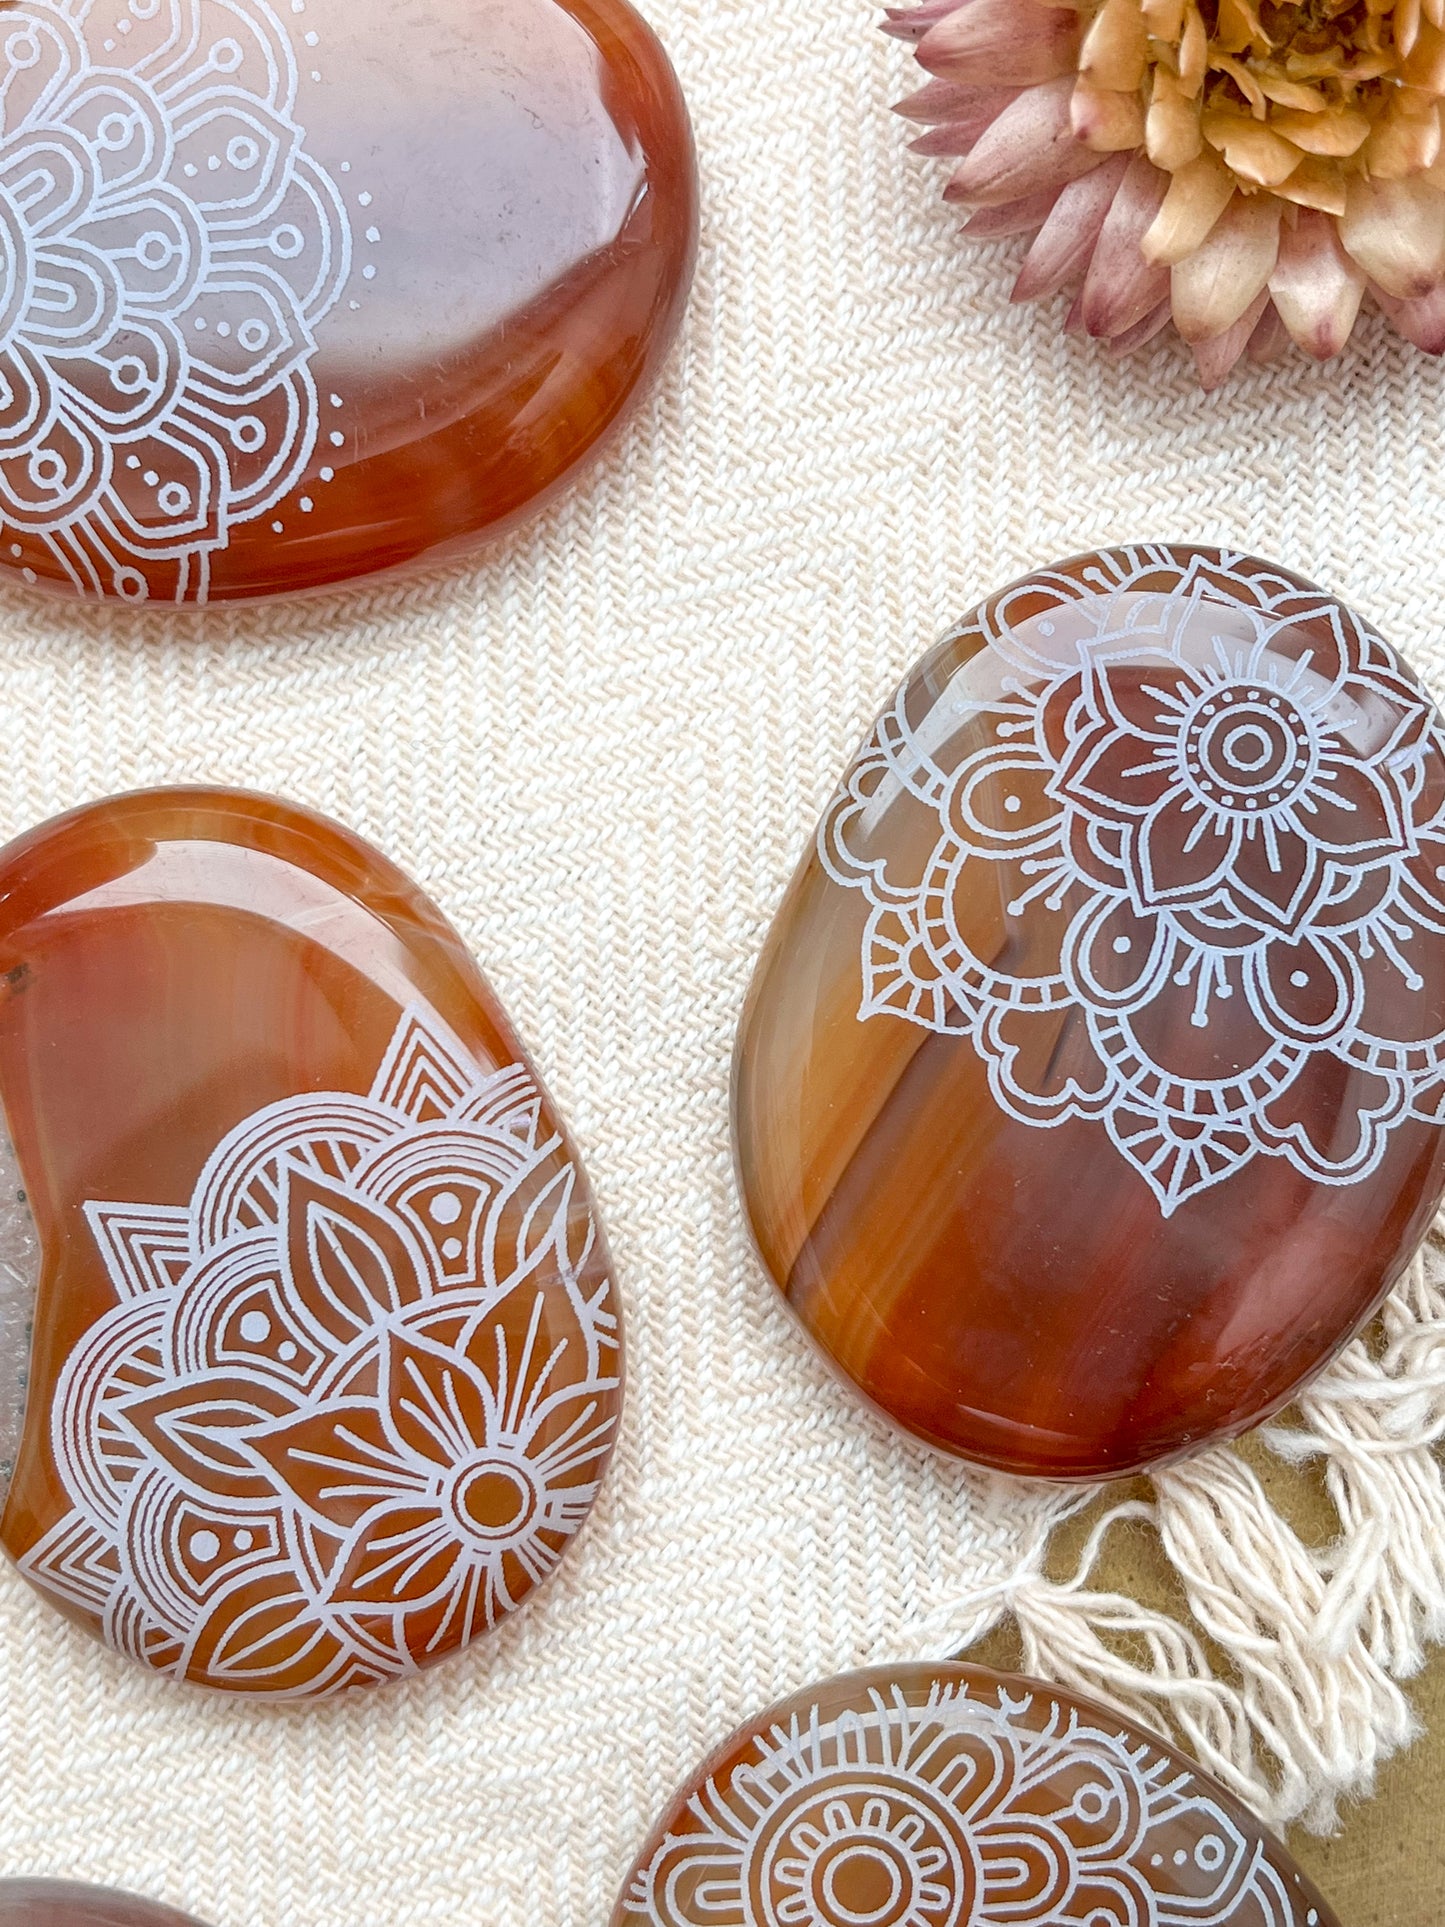 Carnelian Agate Worry Stone Etched with Various Mandalas - Fractalista Designs